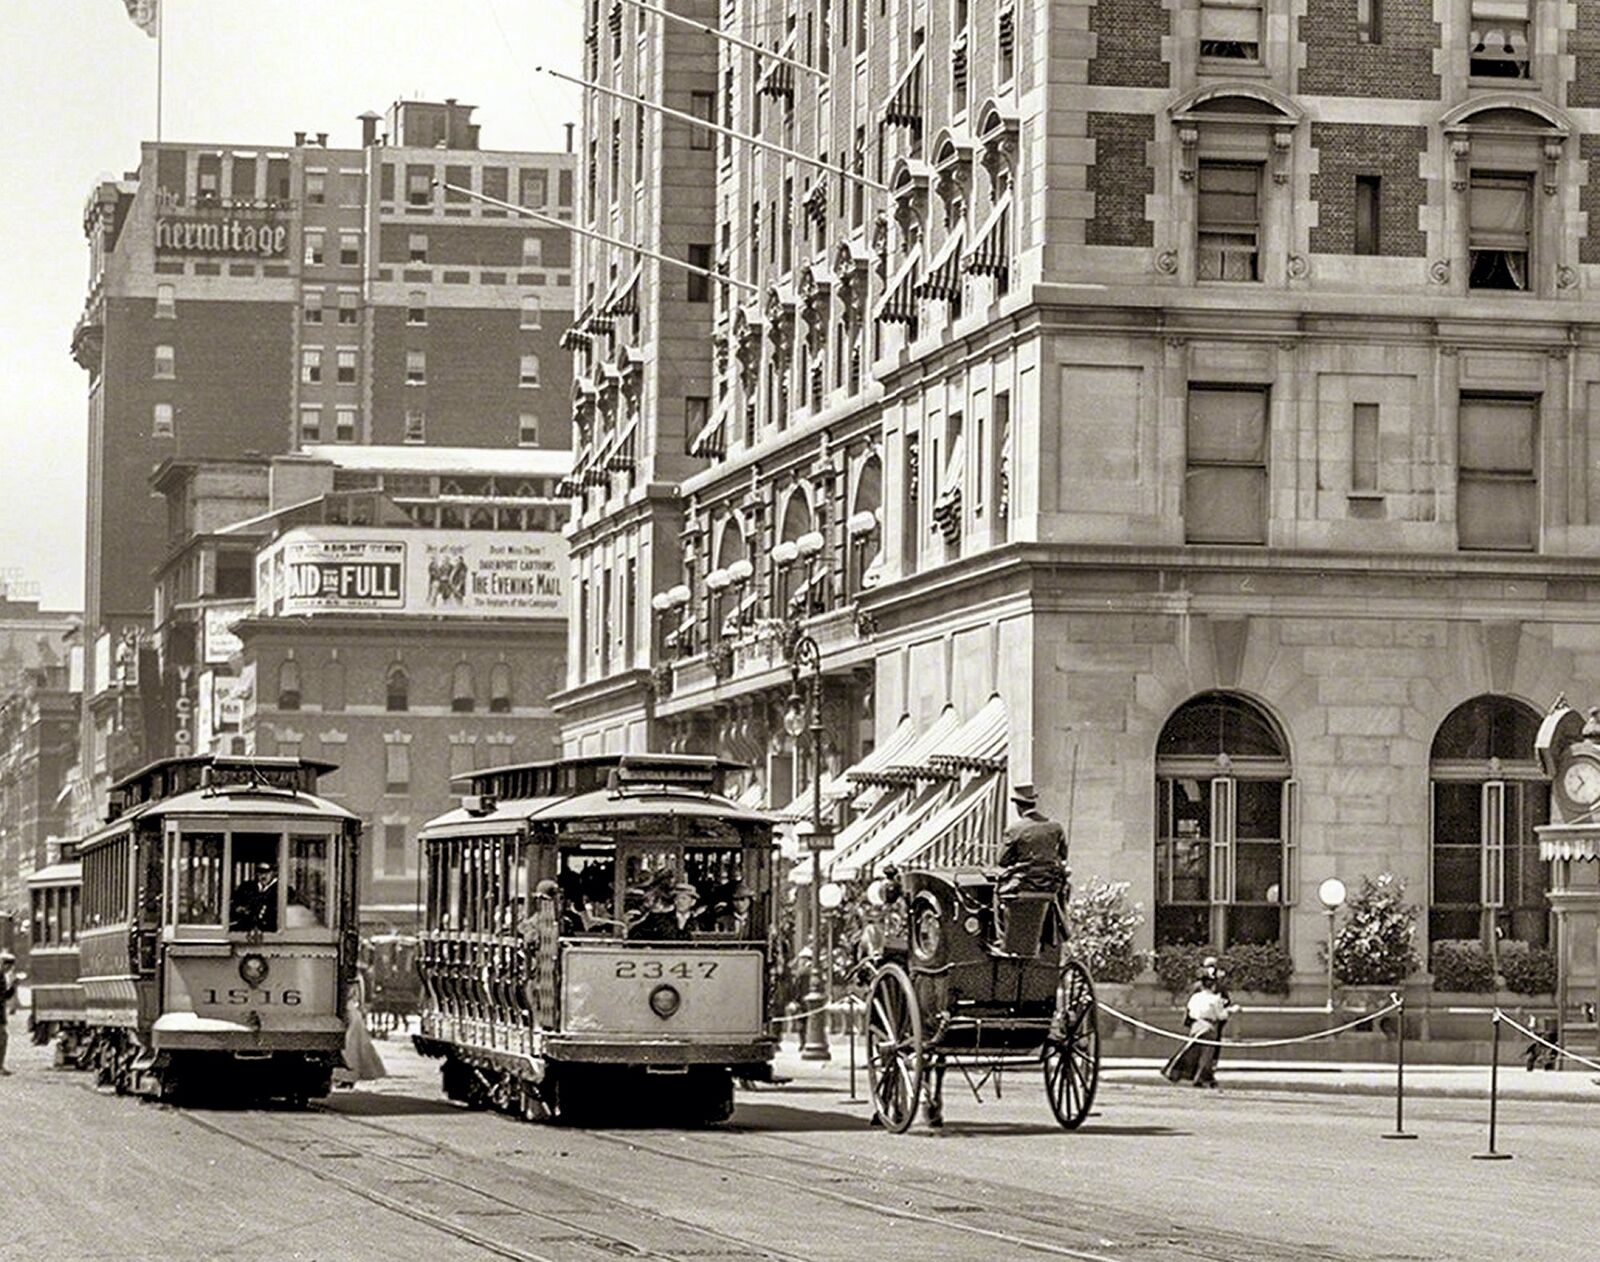 1908 BROADWAY & TIMES SQUARE New York STREET CARS Photo (183-R )